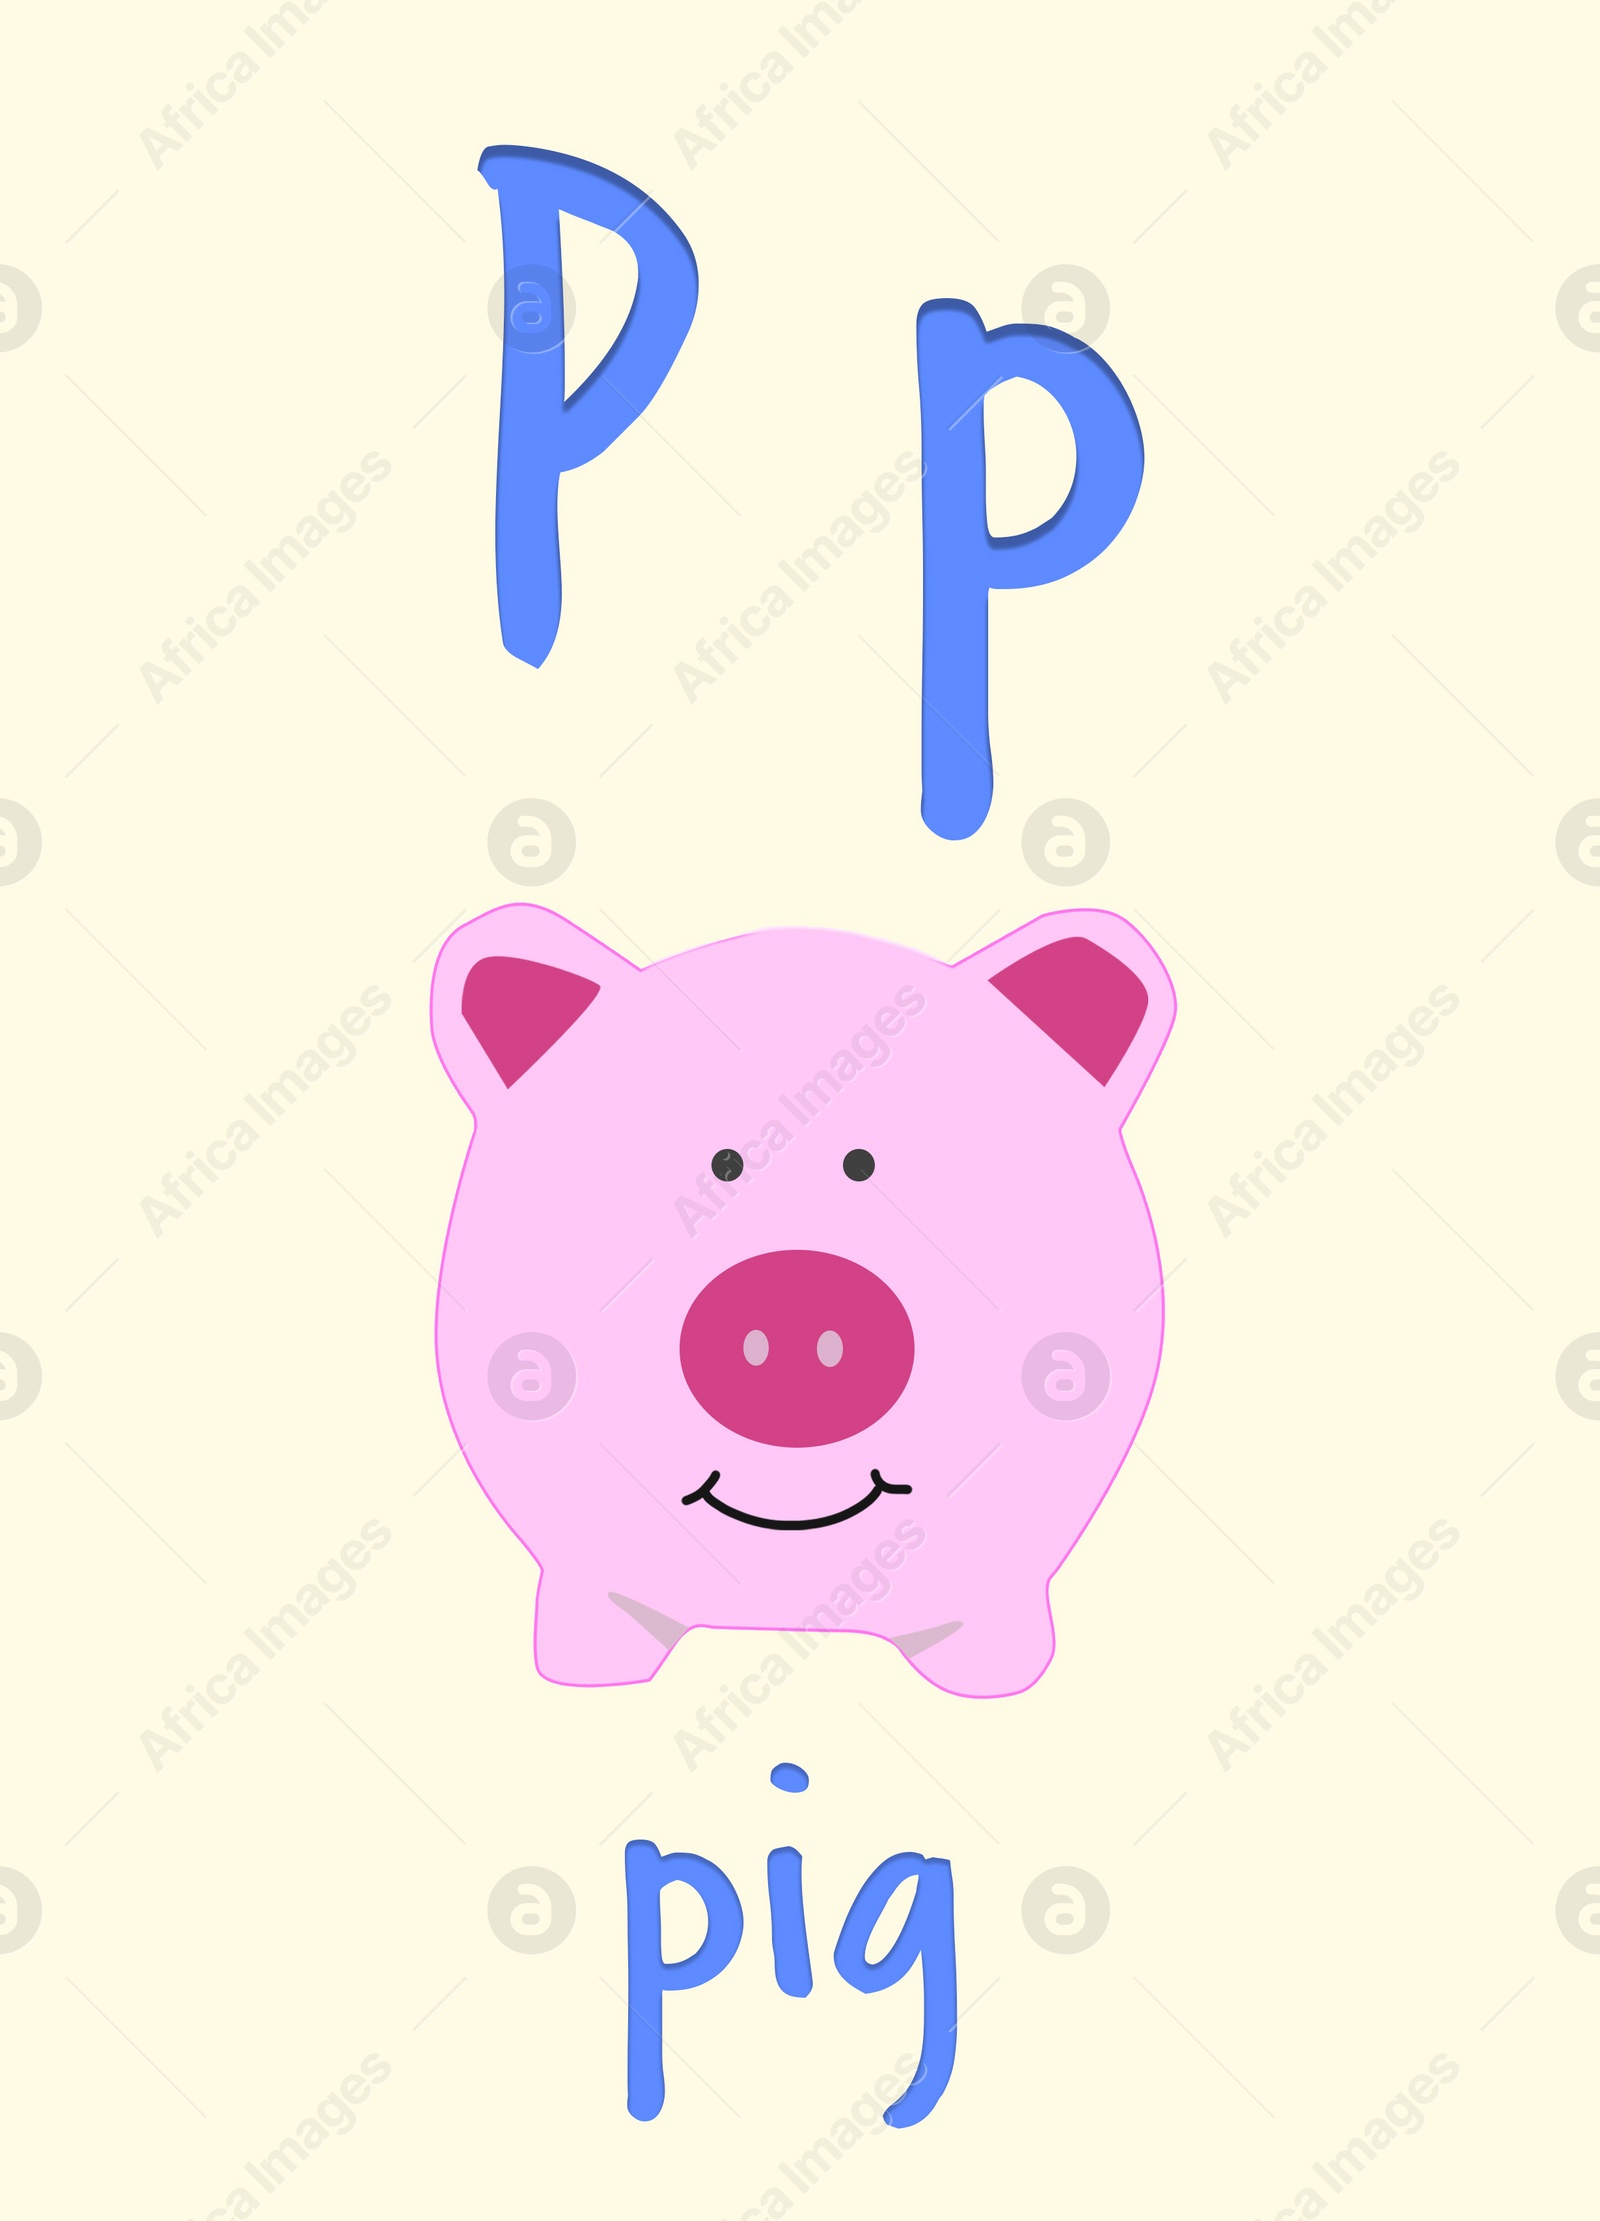 Illustration of Learning English alphabet. Card with letter P and pig, illustration